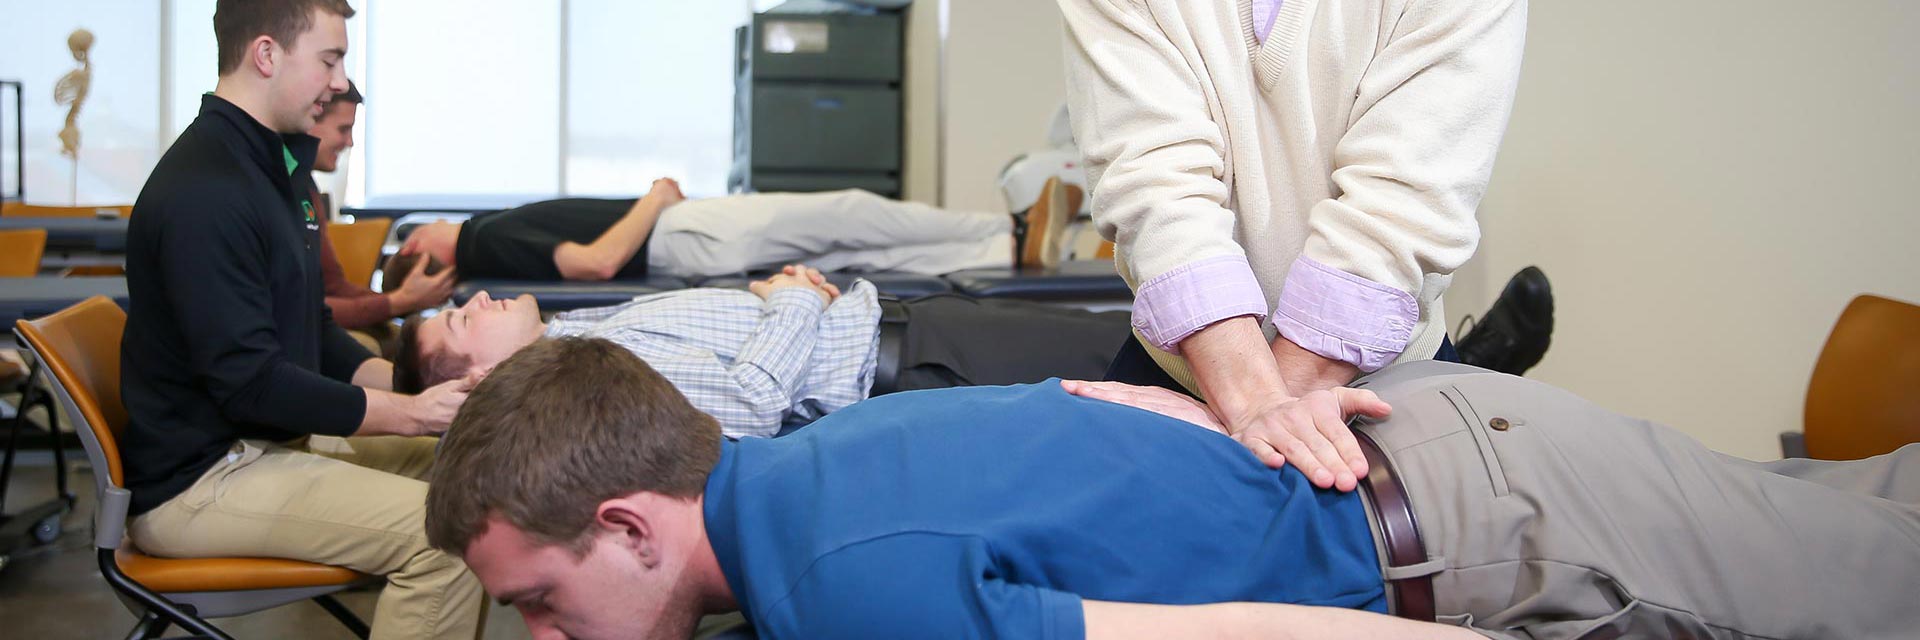 pre-chiropractic students in class